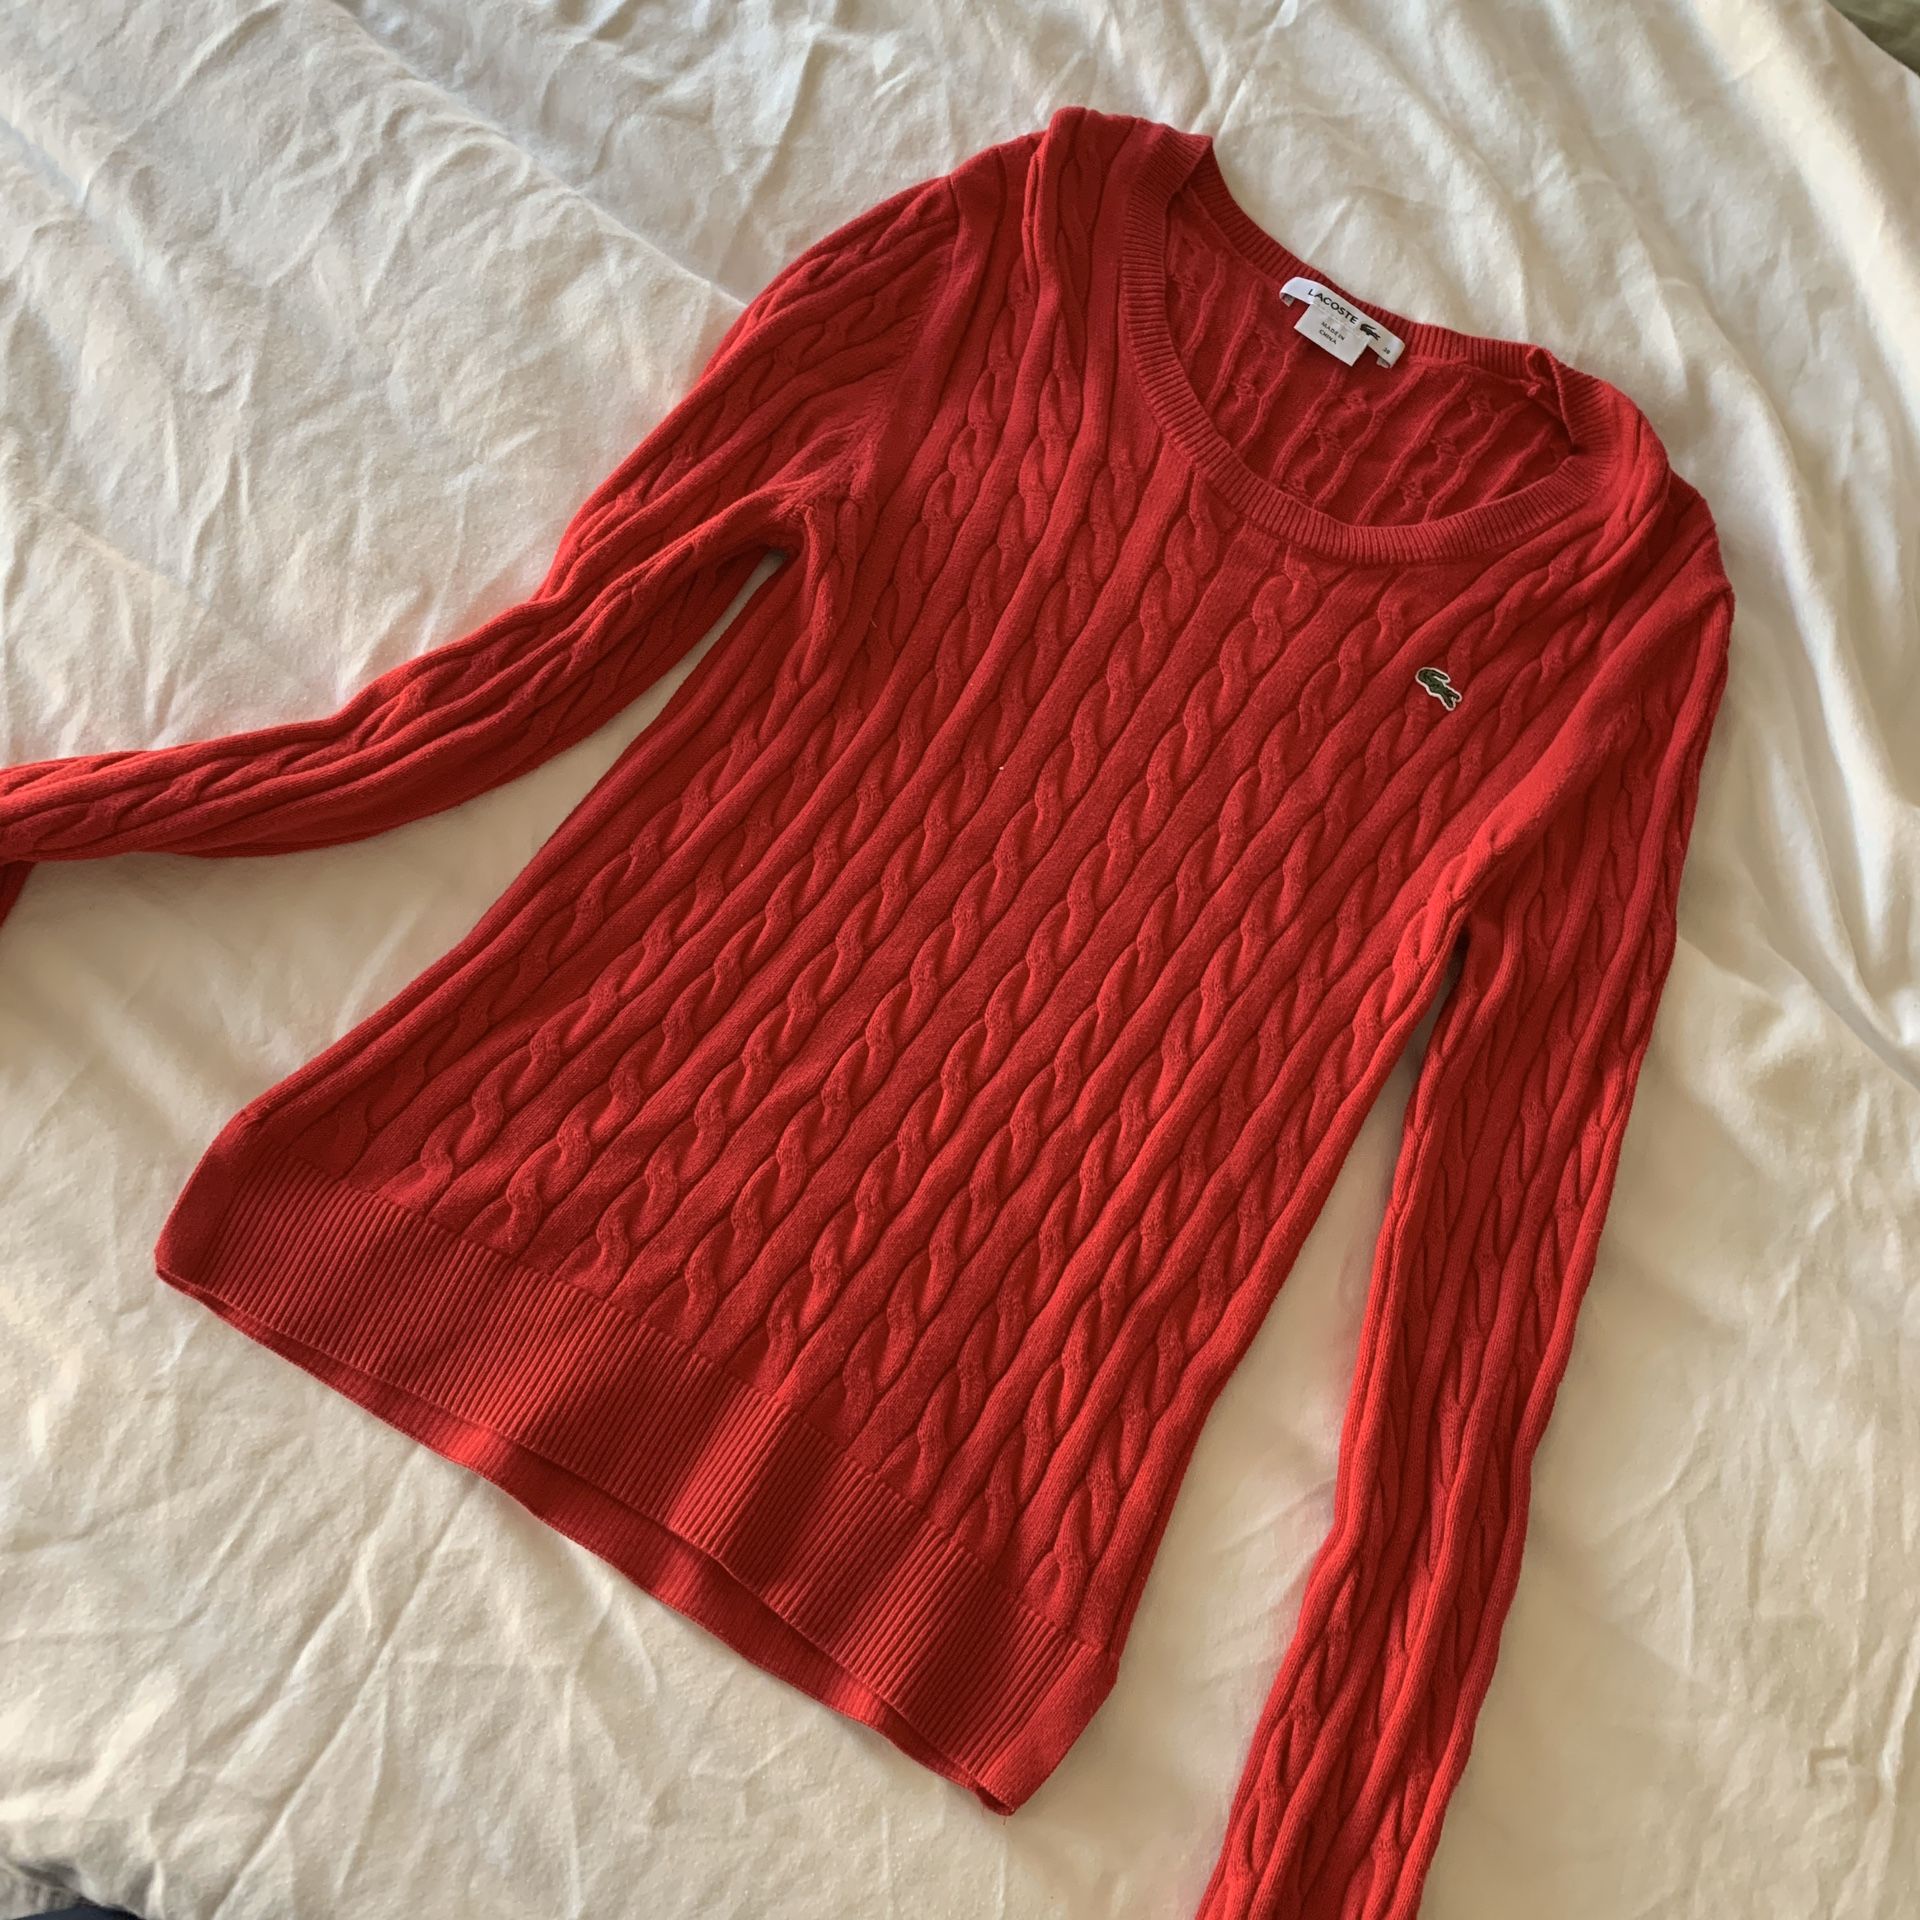 Women’s Lacoste cable knit sweater